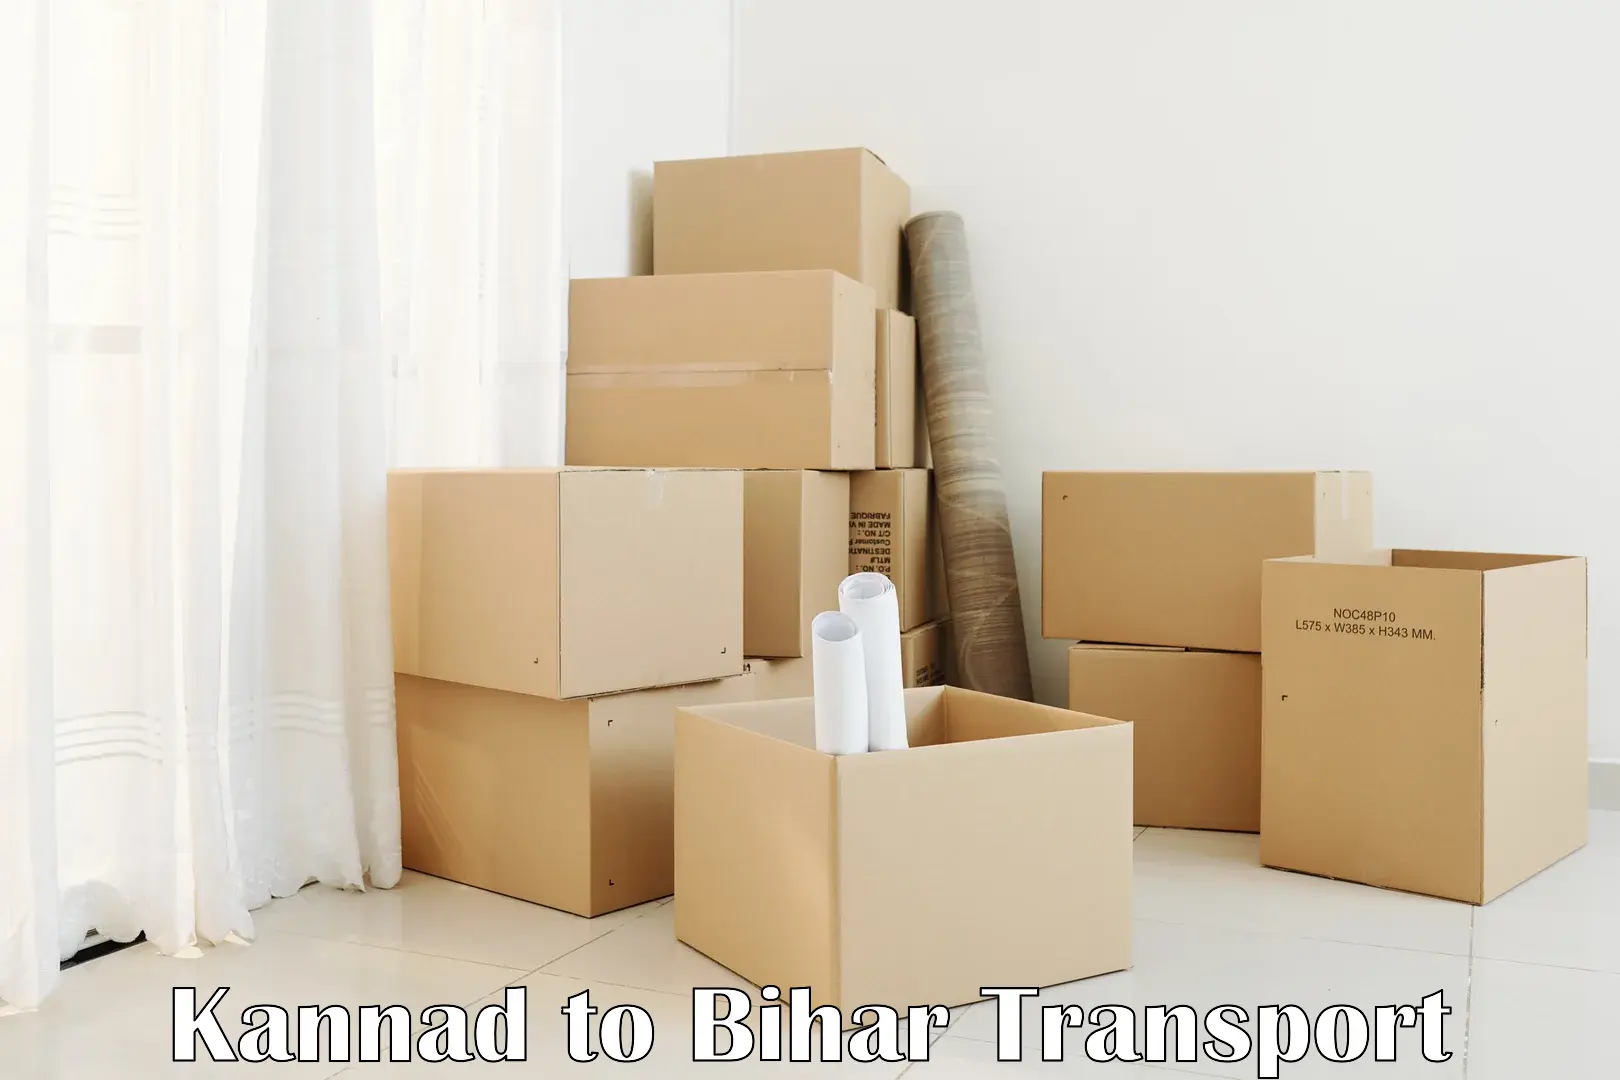 Container transportation services Kannad to Biraul